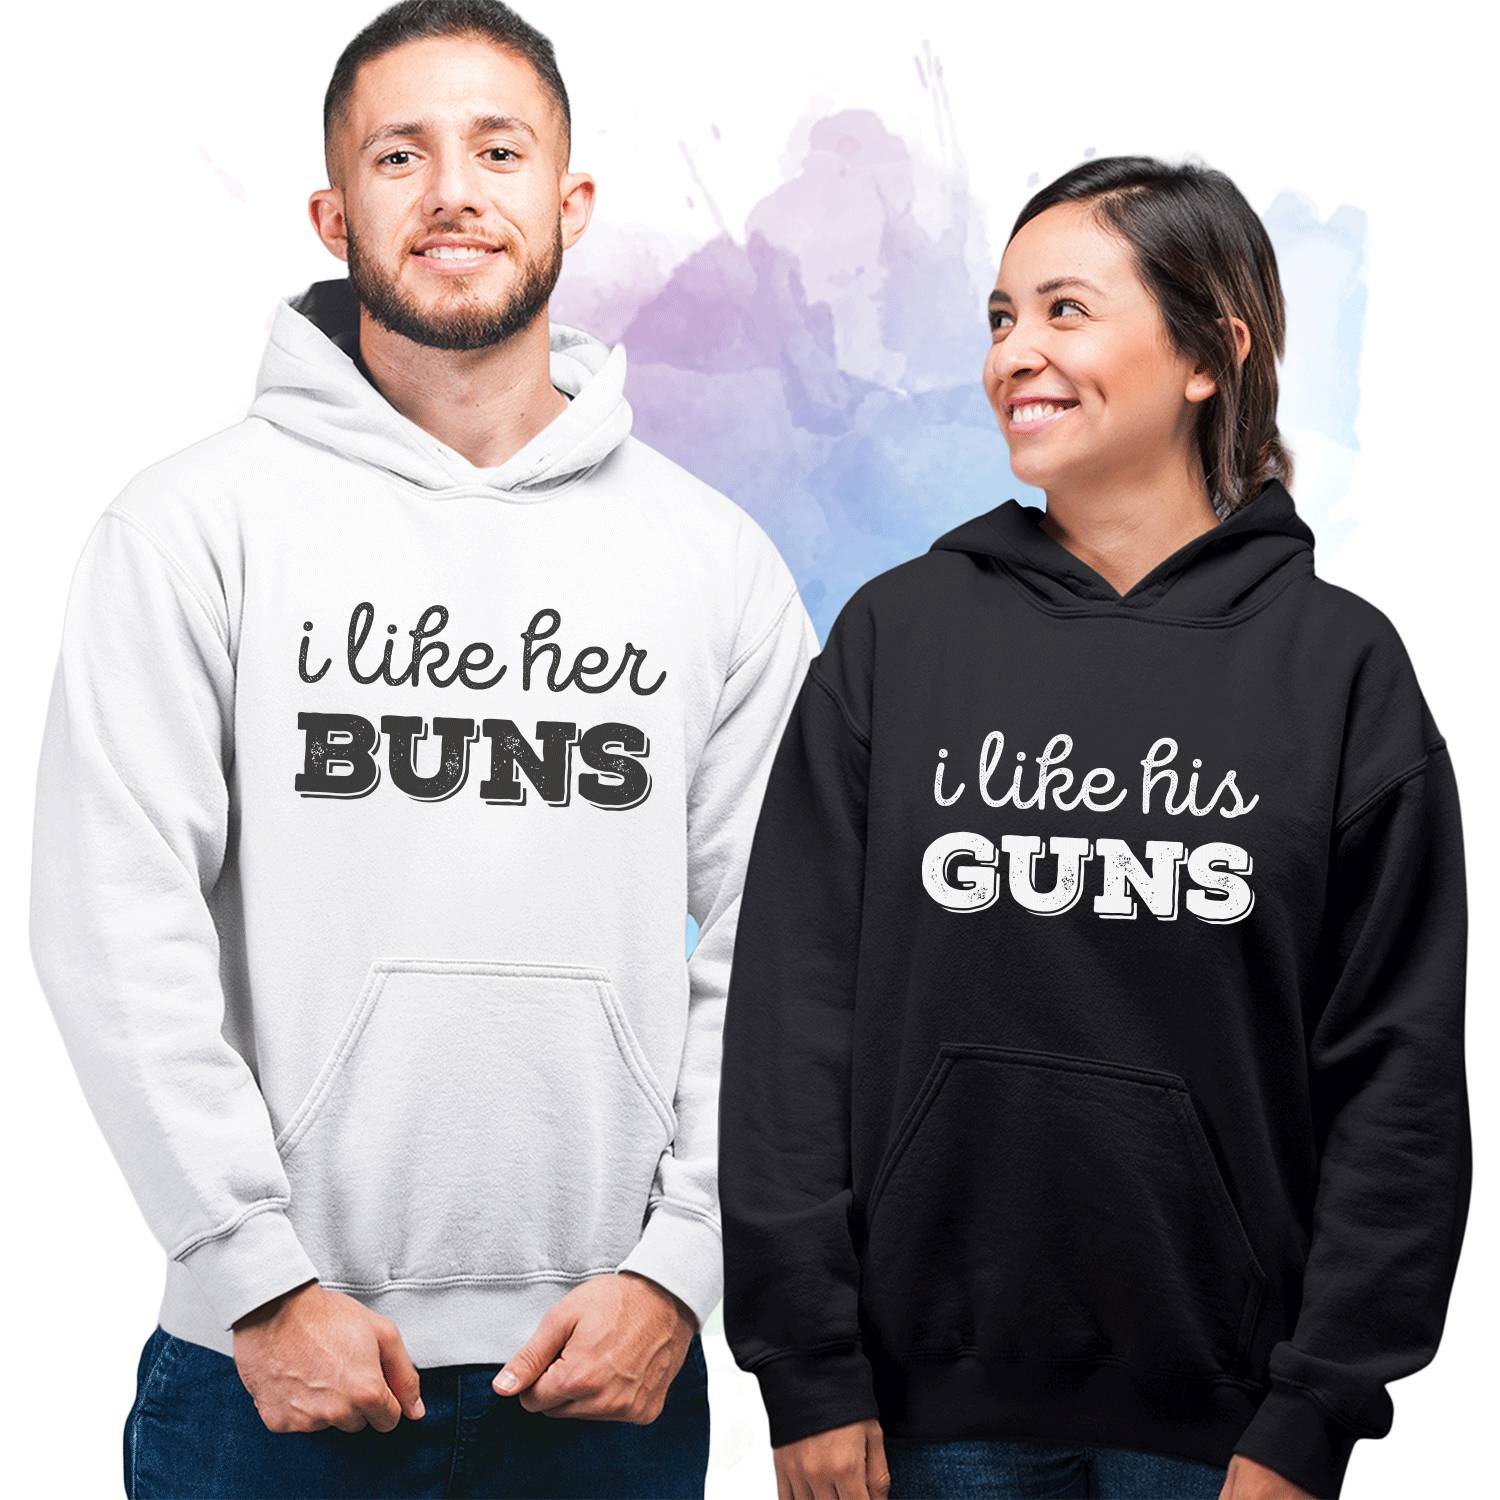 https://fabconic.com/wp-content/uploads/2020/01/New-Products-from-15012020_0004_HIS-GUNS-HER-BUNS-HOOSIE.jpg